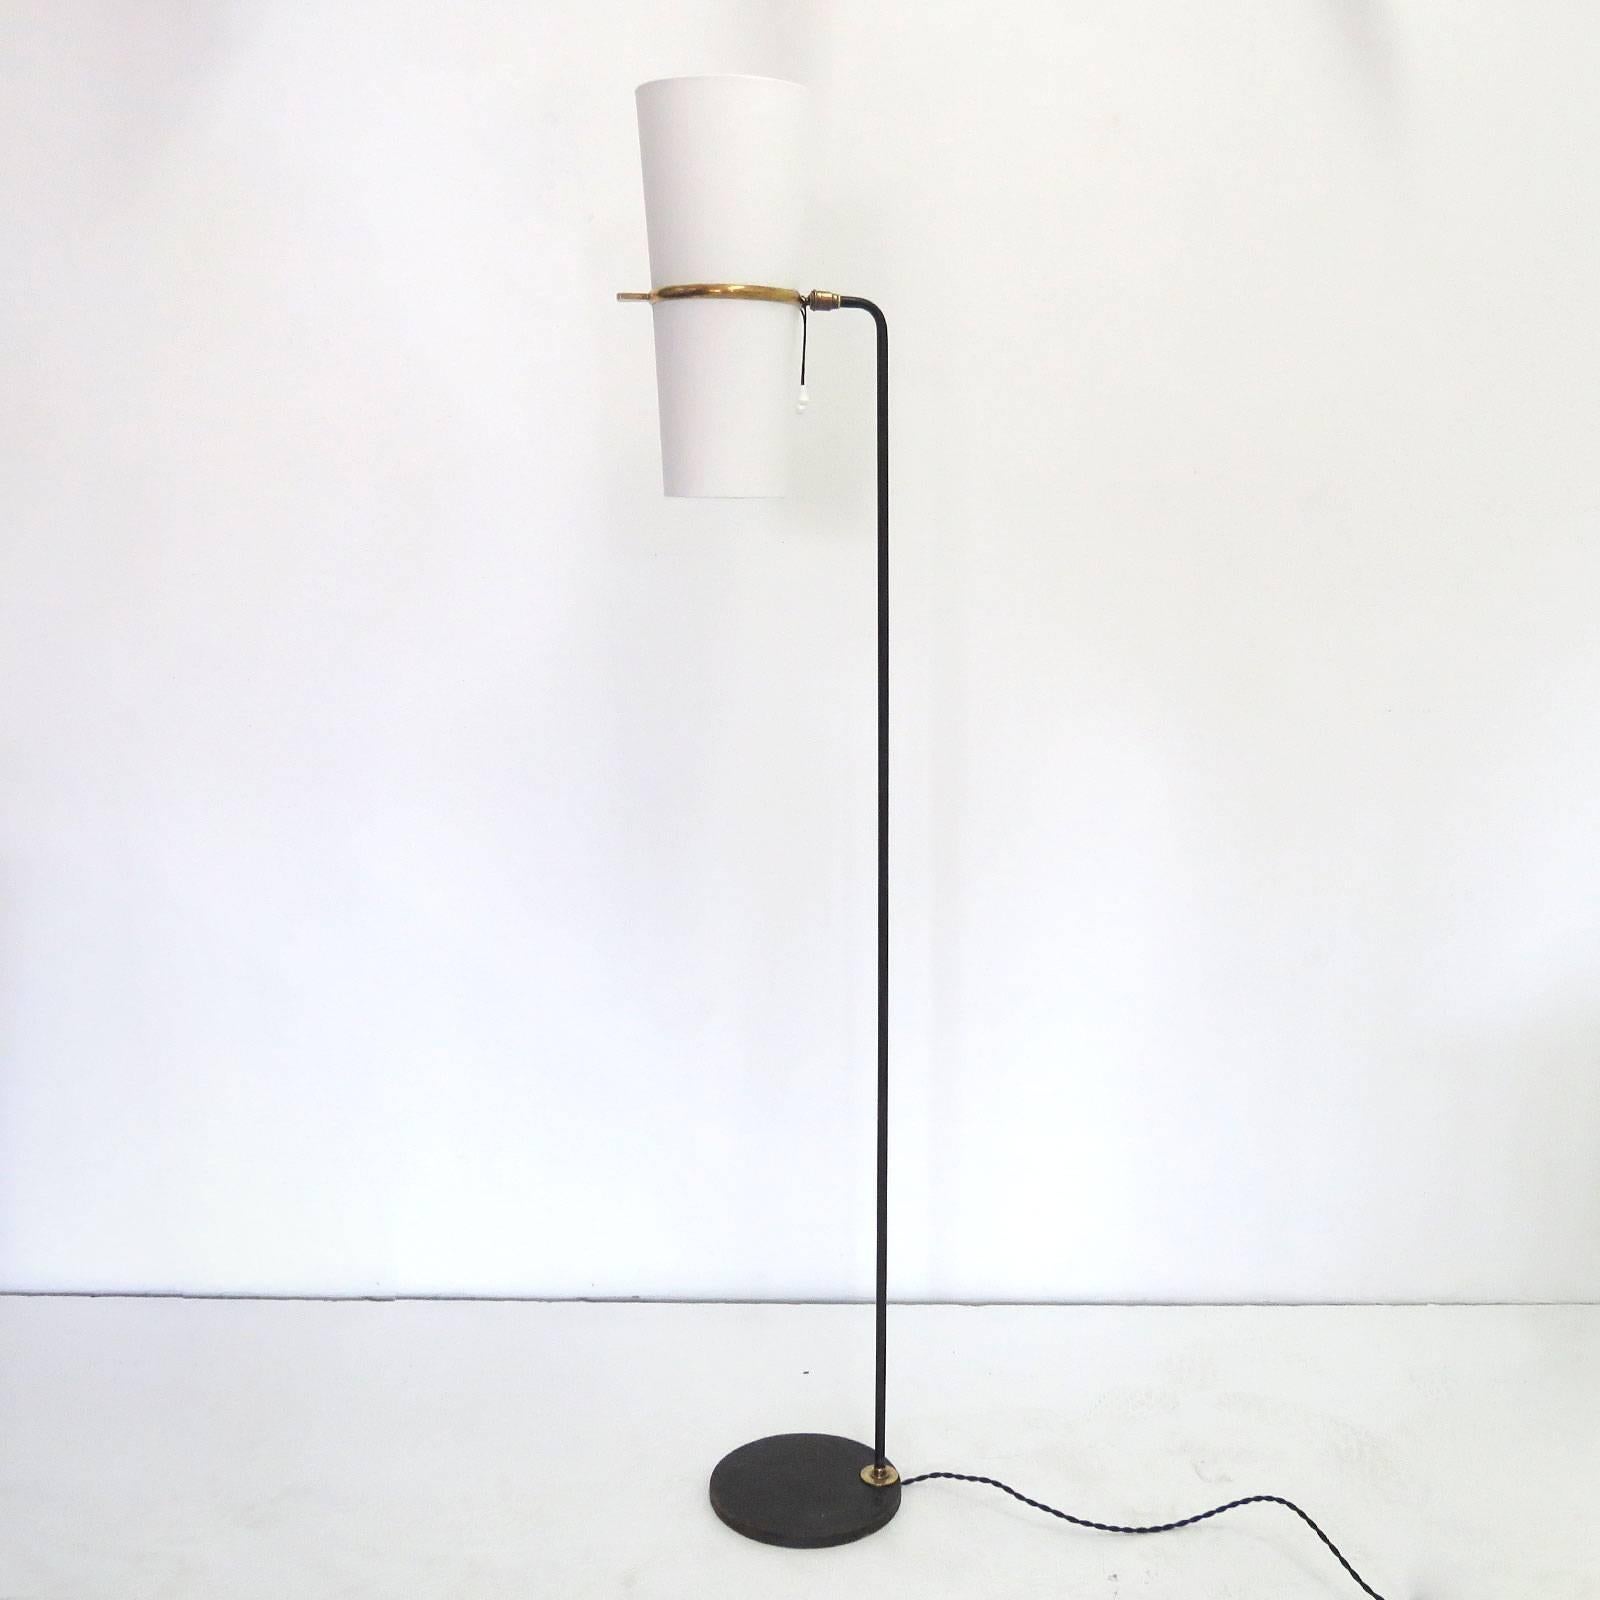 Elegant 1950s floor lamp by the French company Maison Lunel with a white silk double rotary shade, a round blackened steel base, post and brass details. The shades are newly mounted onto the original frames. The light is fully adjustable due to a